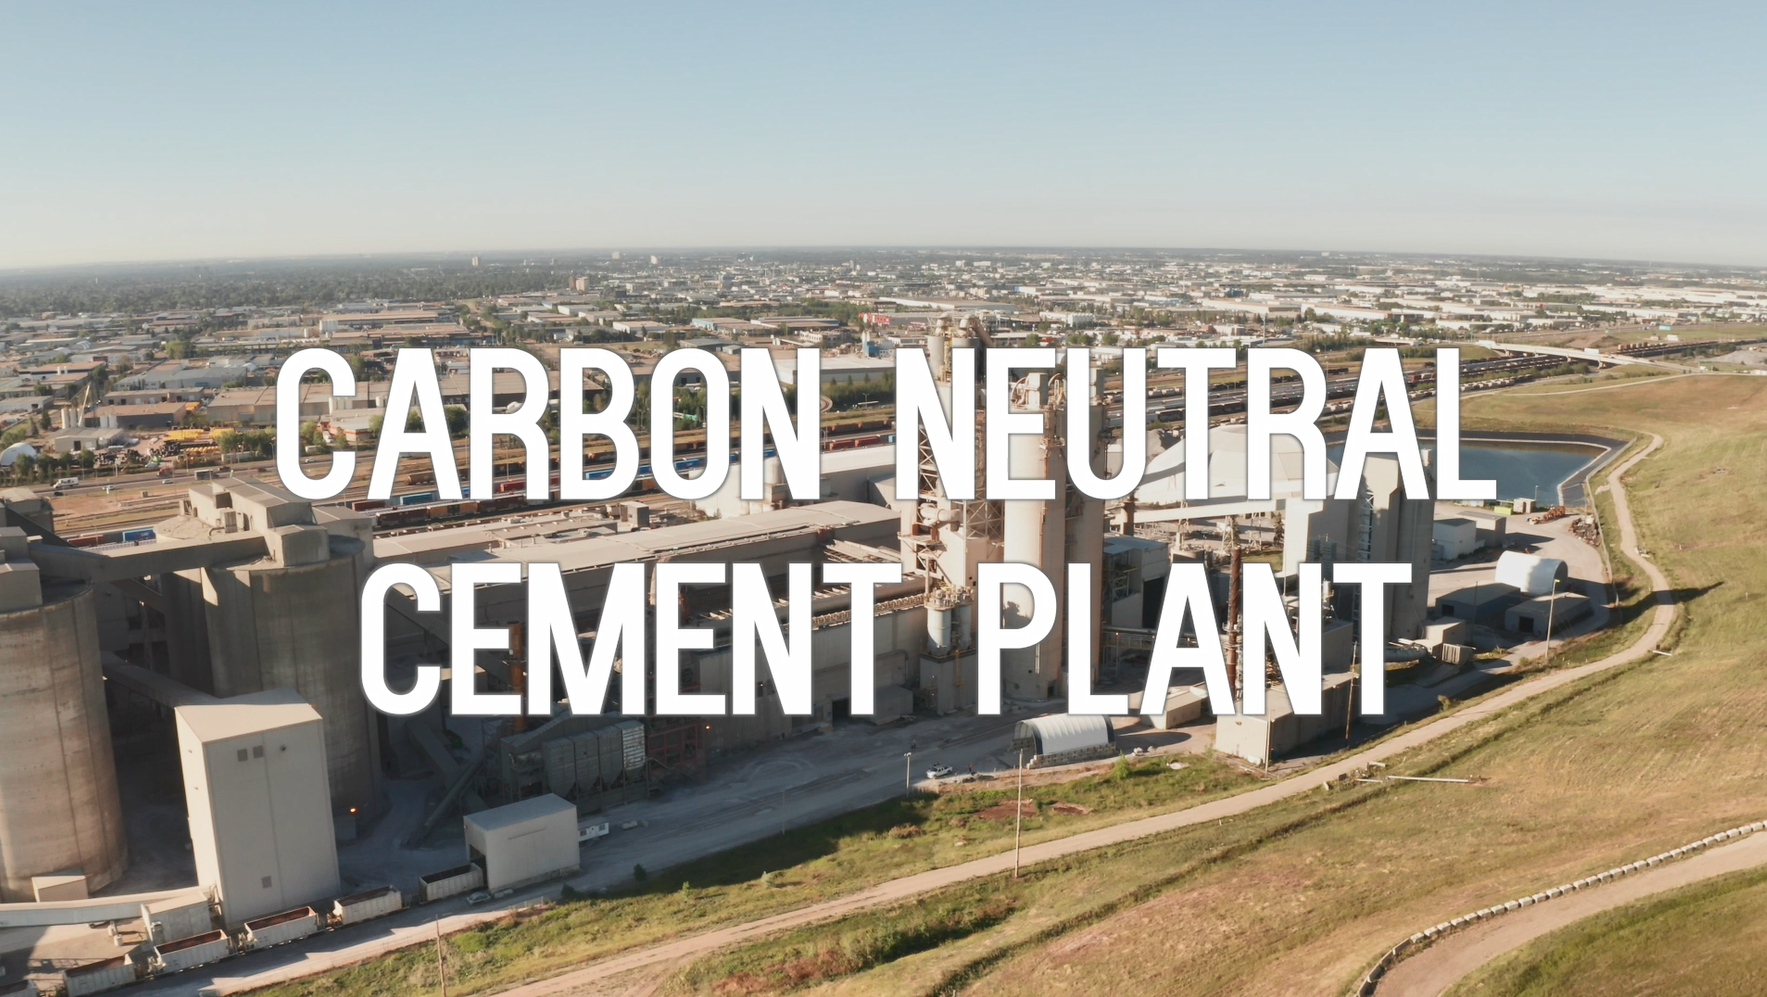 Aerial view of a cement plant, text overlay: carbon neutral cement plant